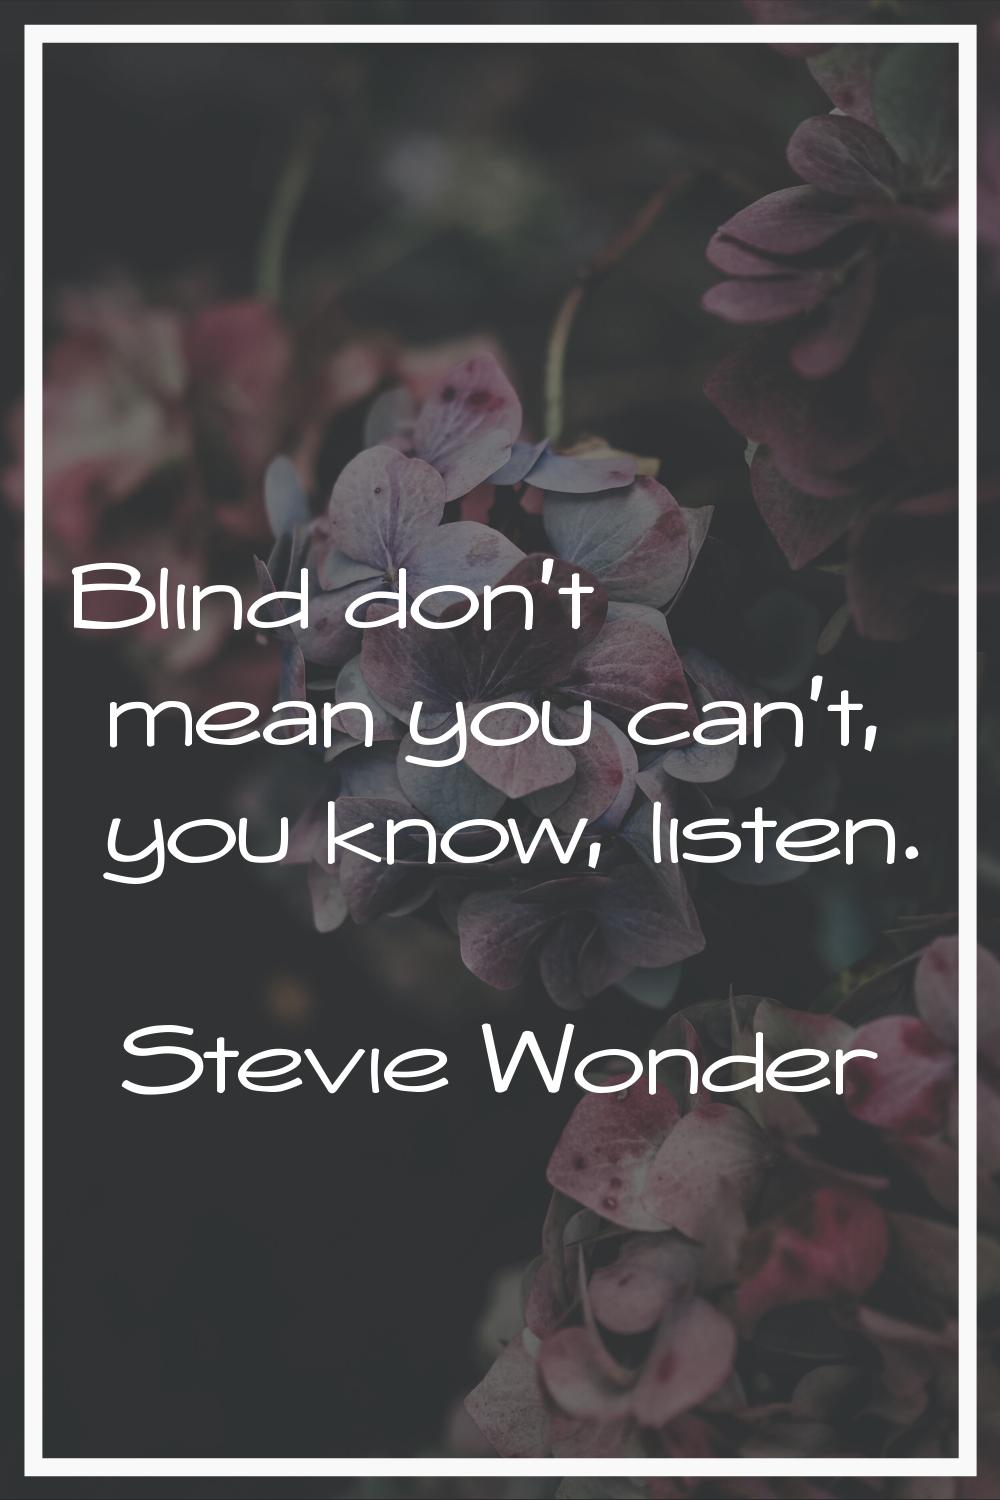 Blind don't mean you can't, you know, listen.